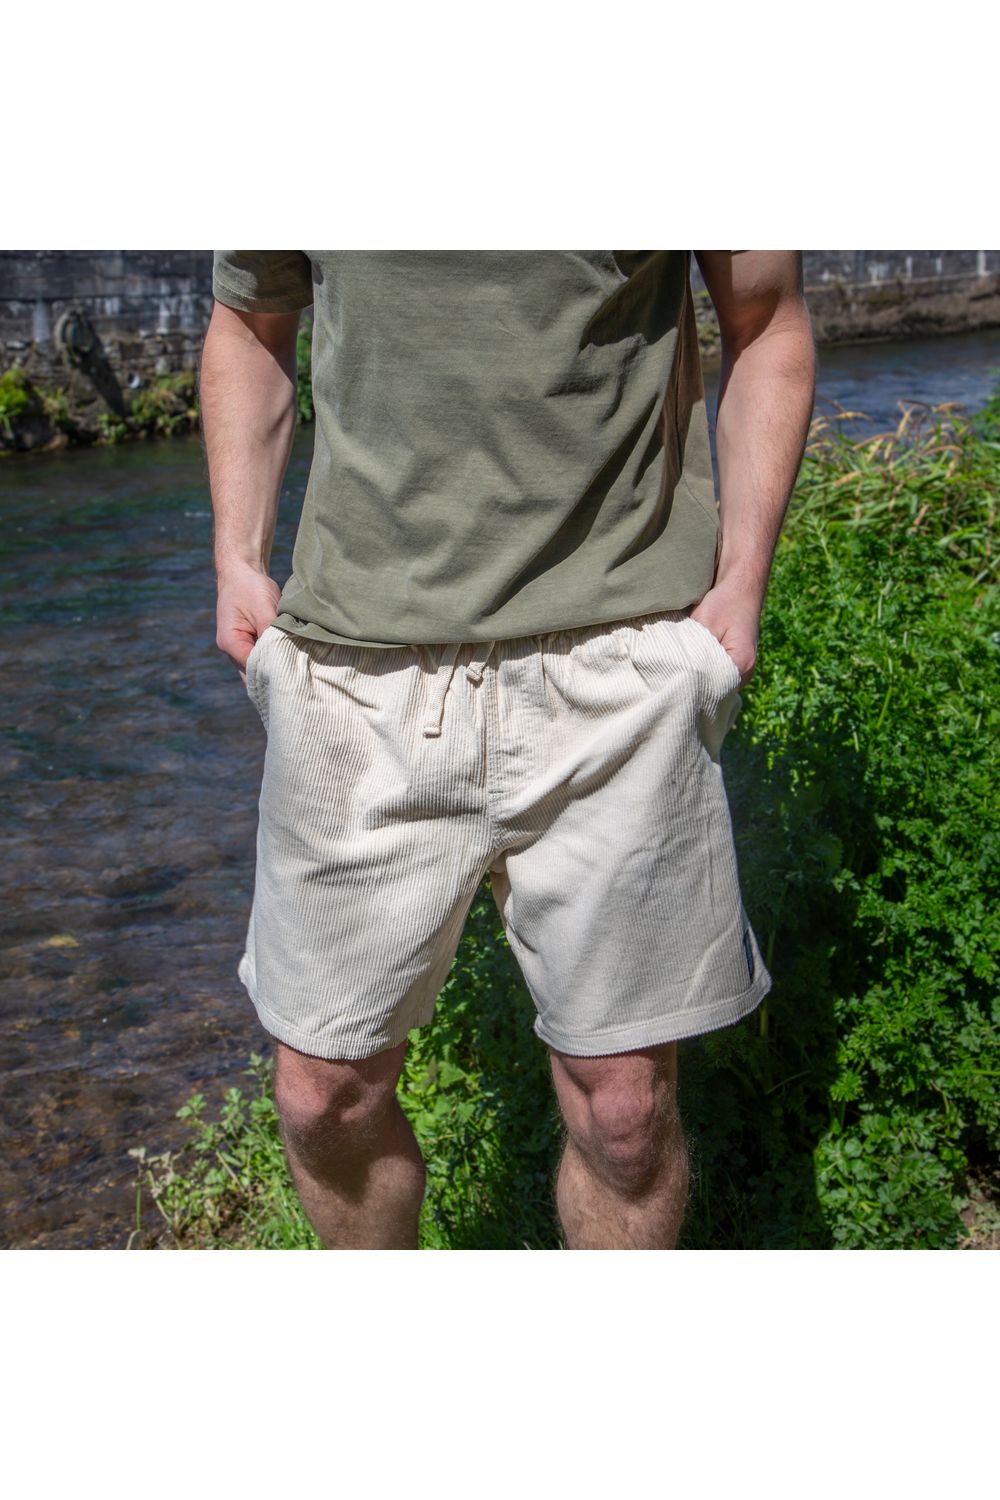 Bamboobay Cord Shorts in Sand yellow on a model front view with hands in pockets